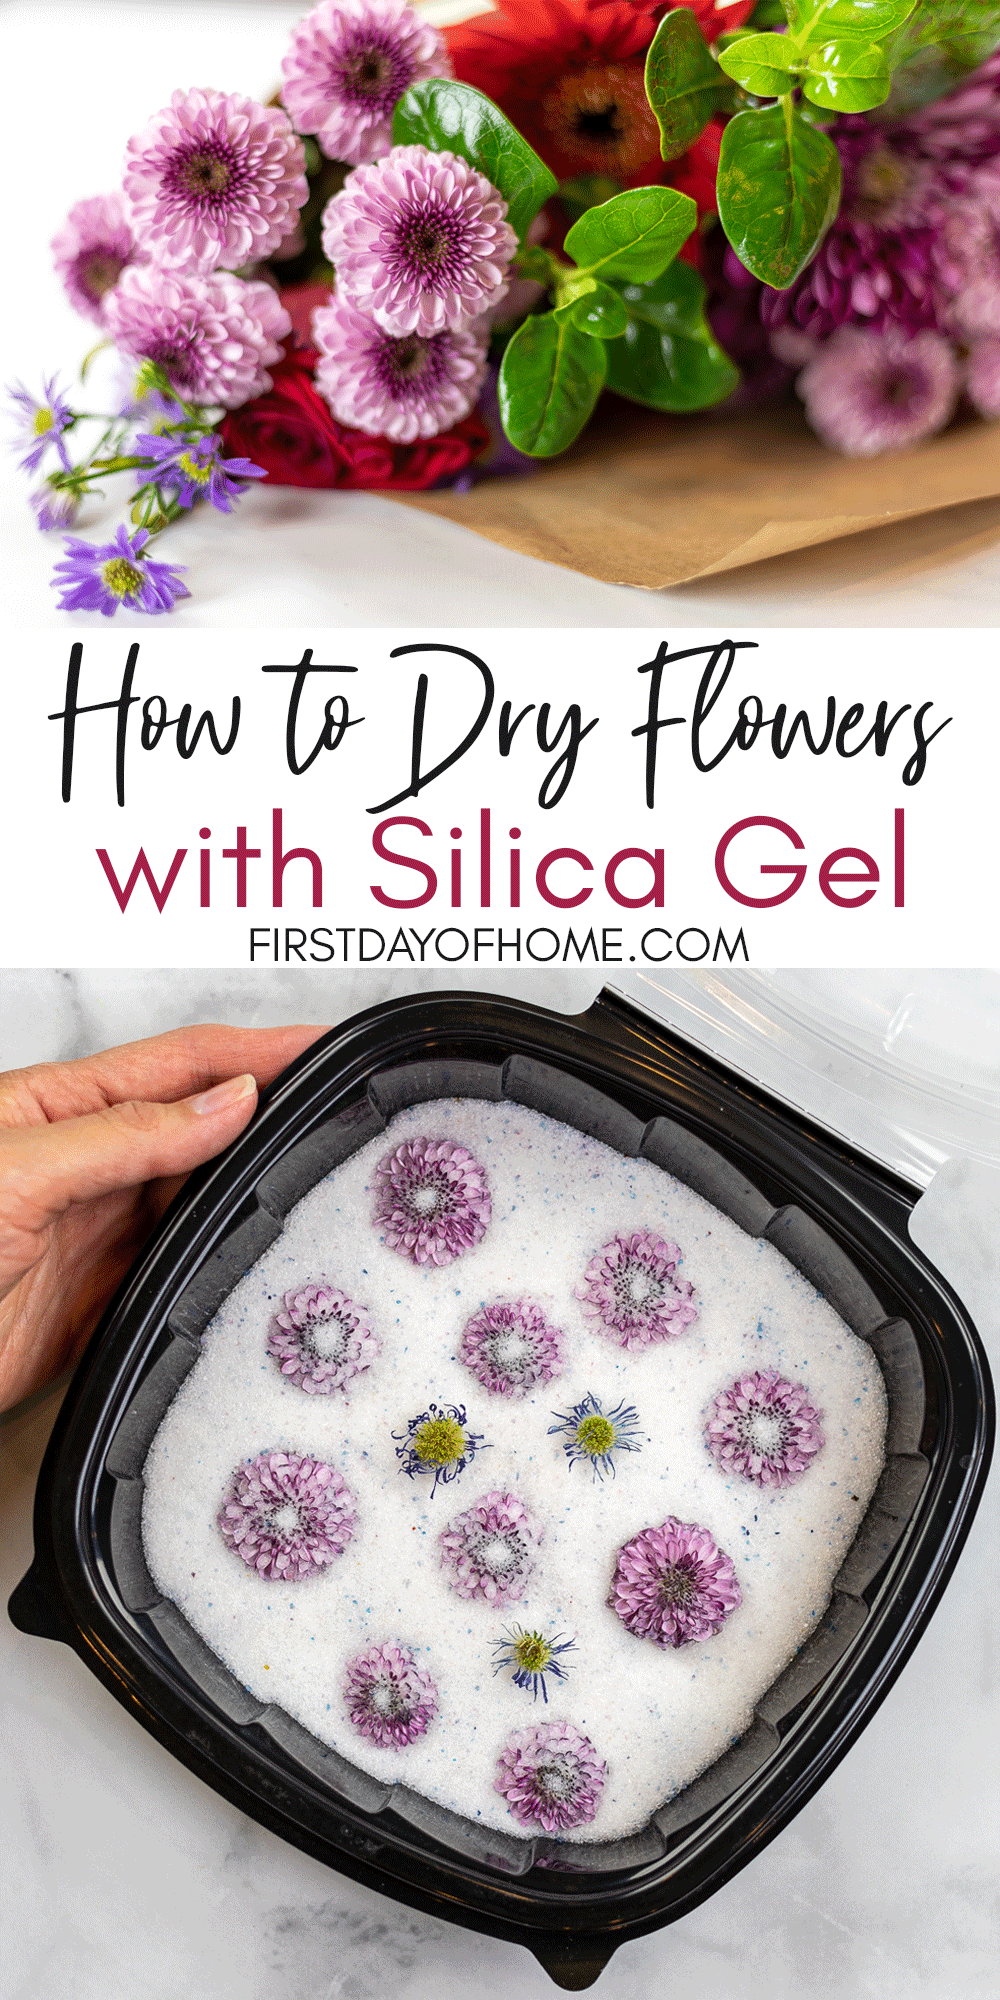 Drying flowers with silica gel